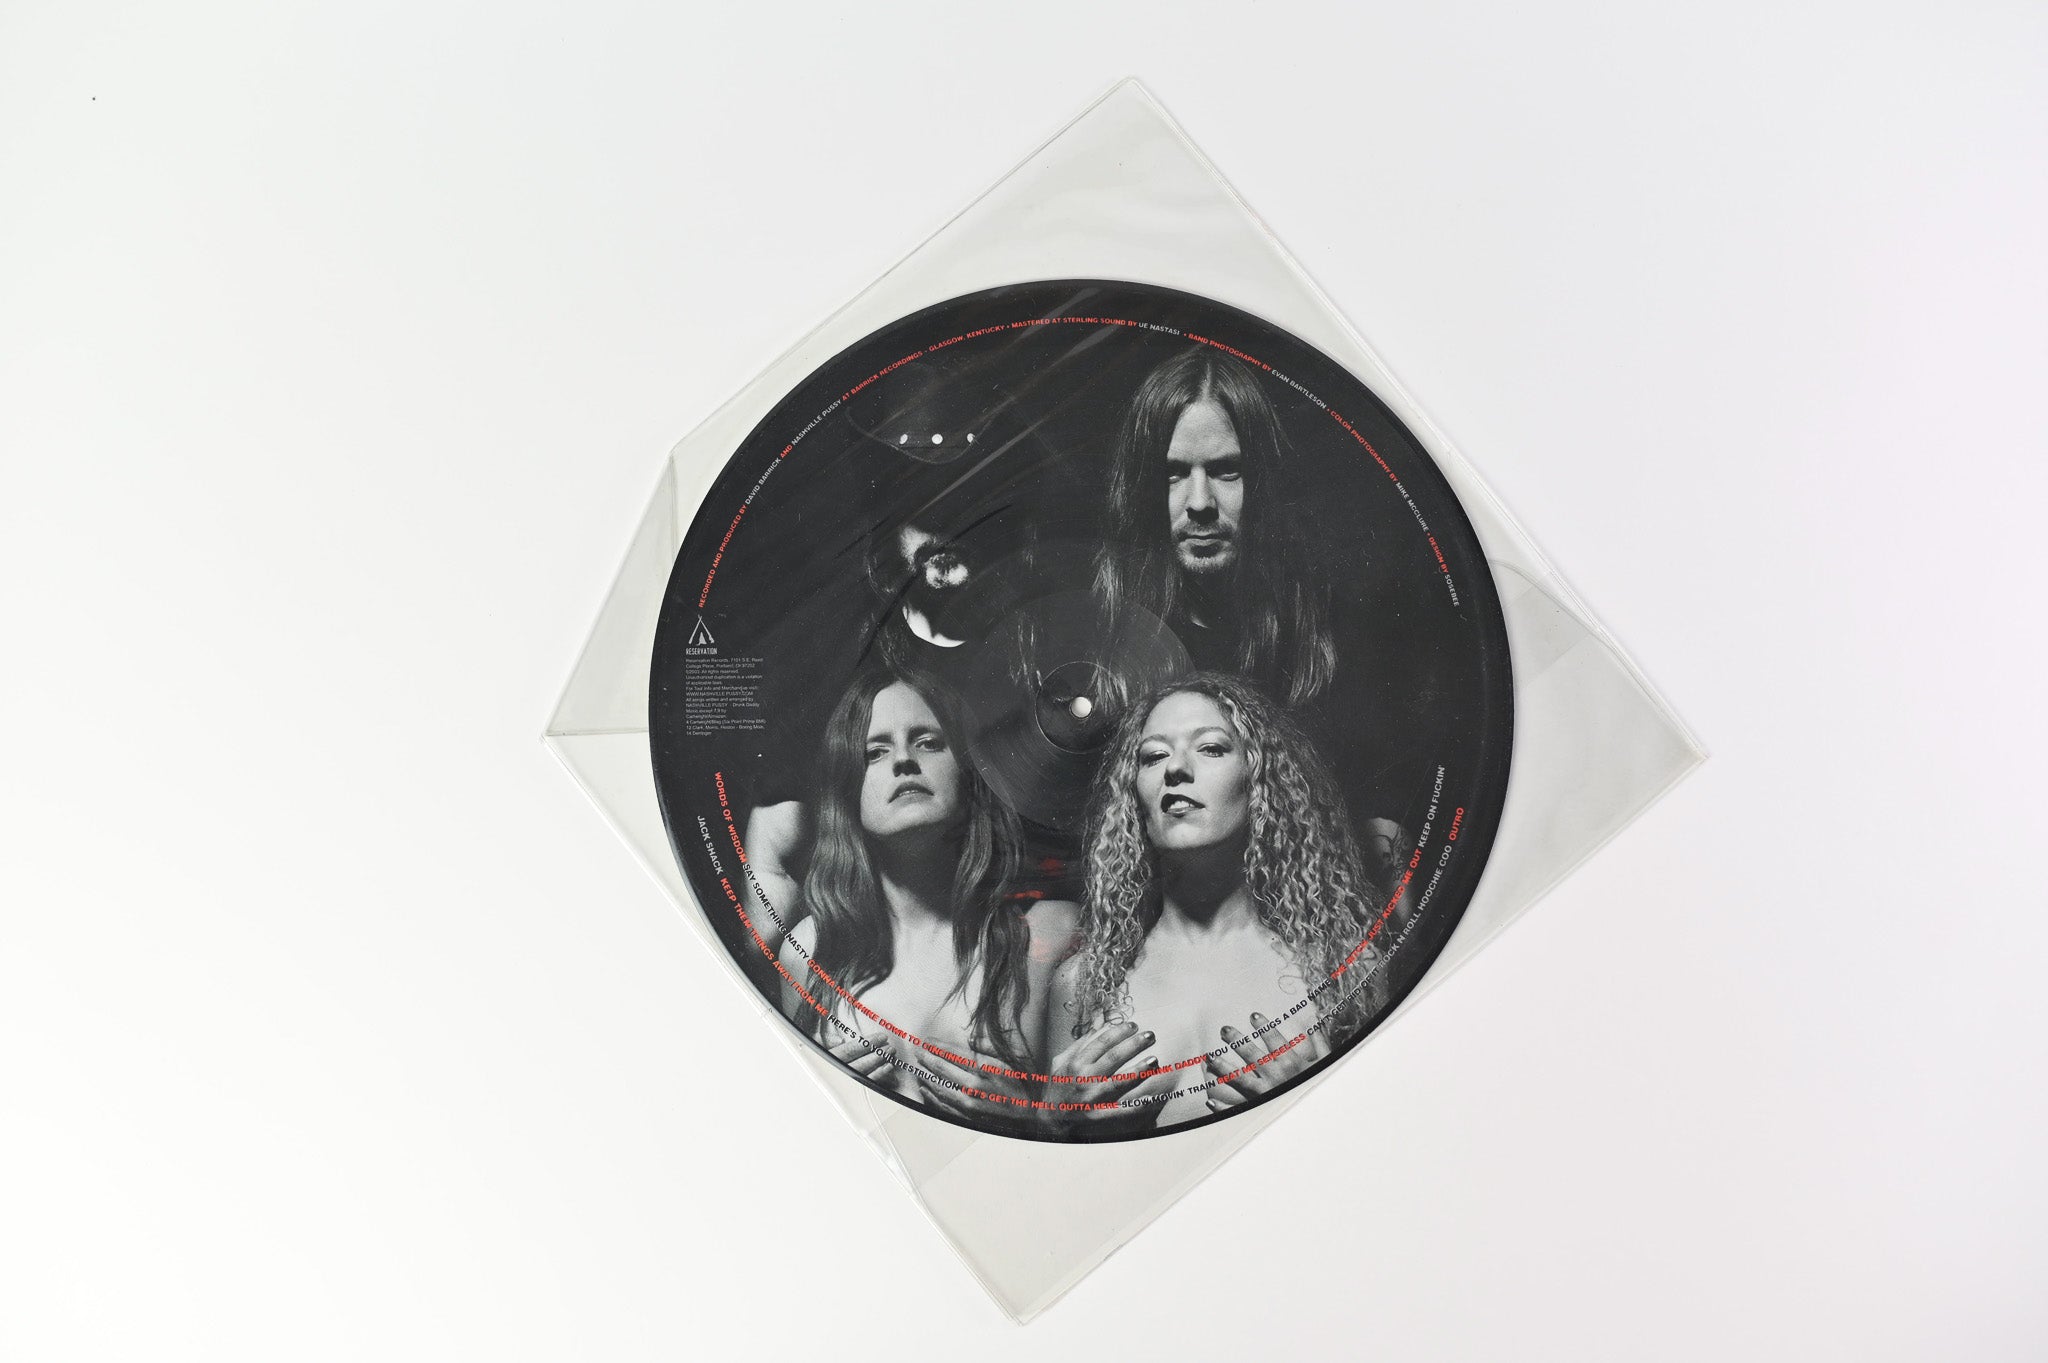 Nashville Pussy - Say Something Nasty Picture Disc